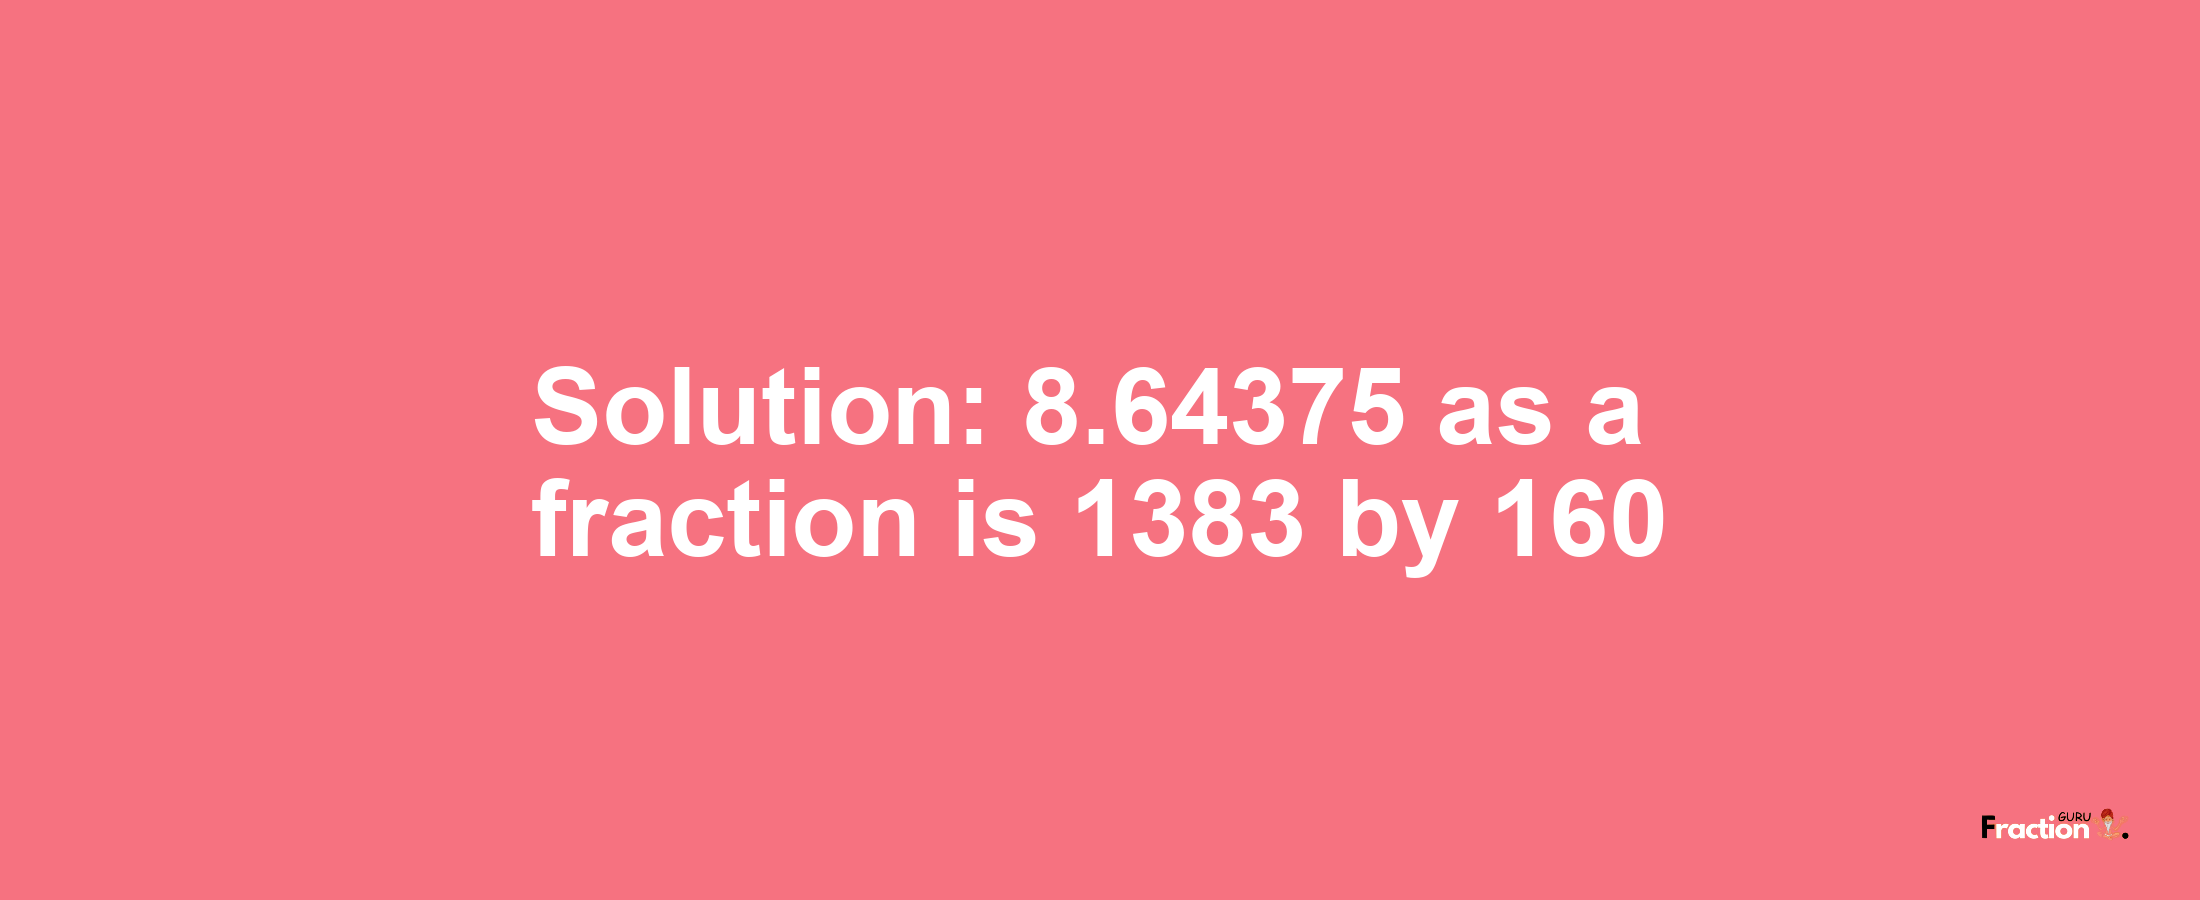 Solution:8.64375 as a fraction is 1383/160